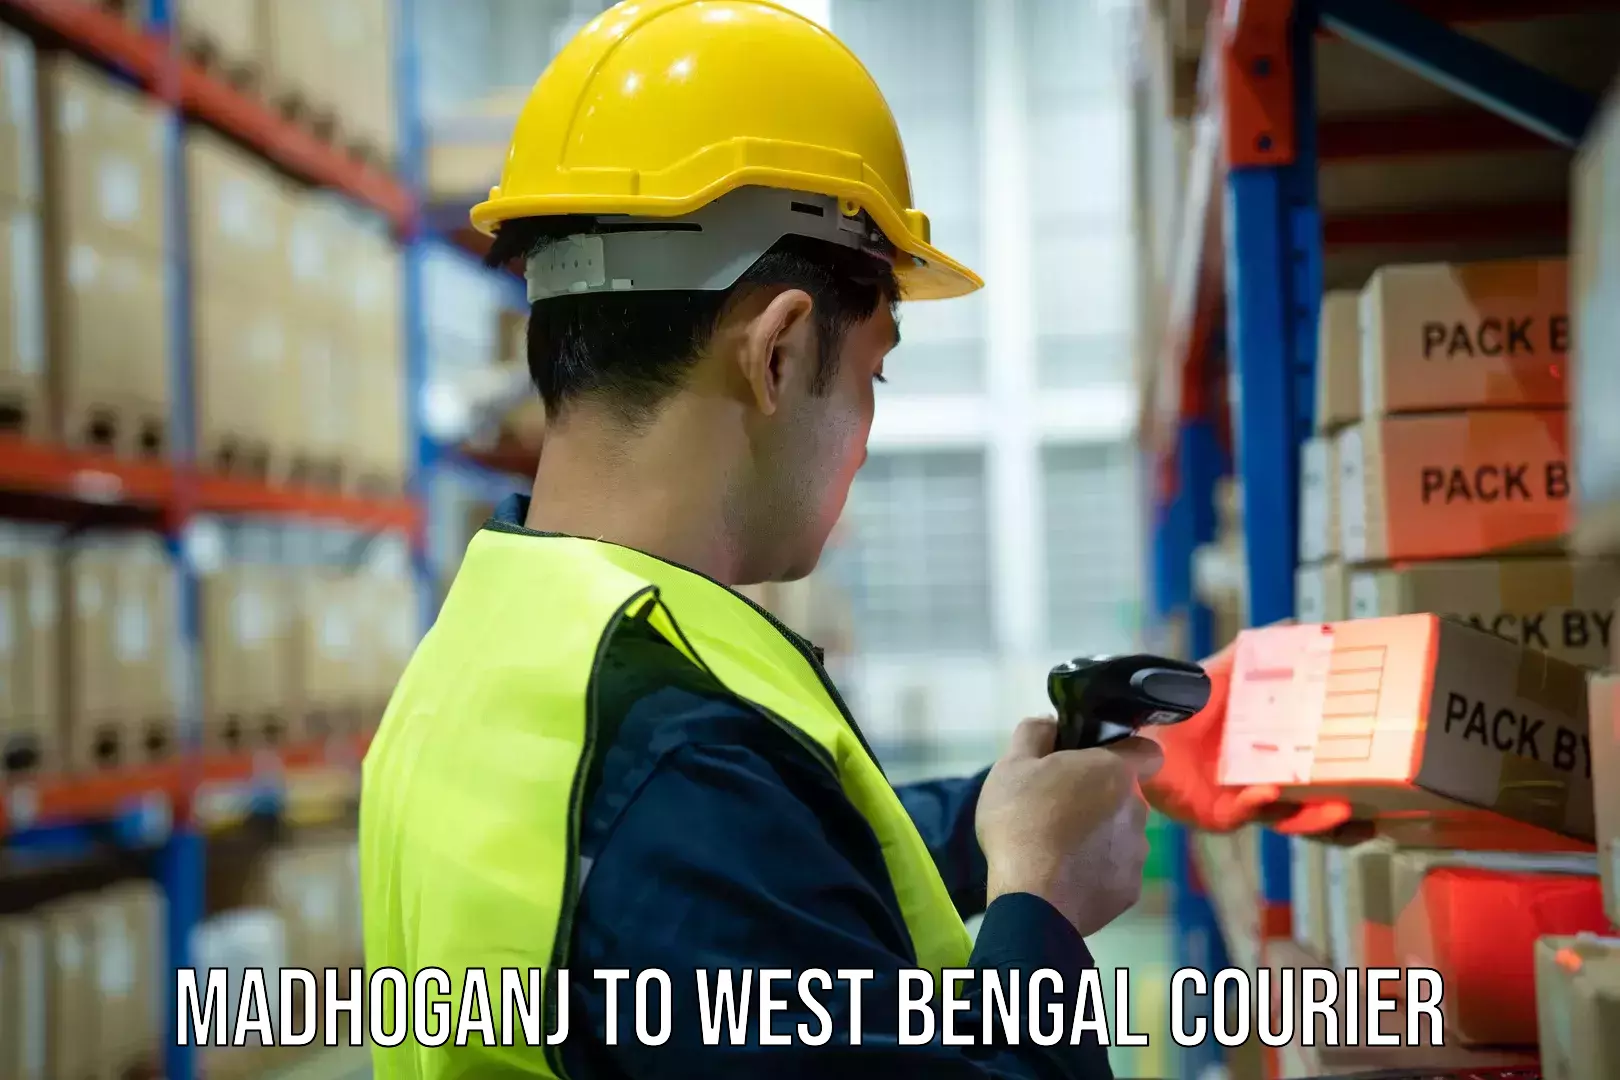 Courier app Madhoganj to West Bengal